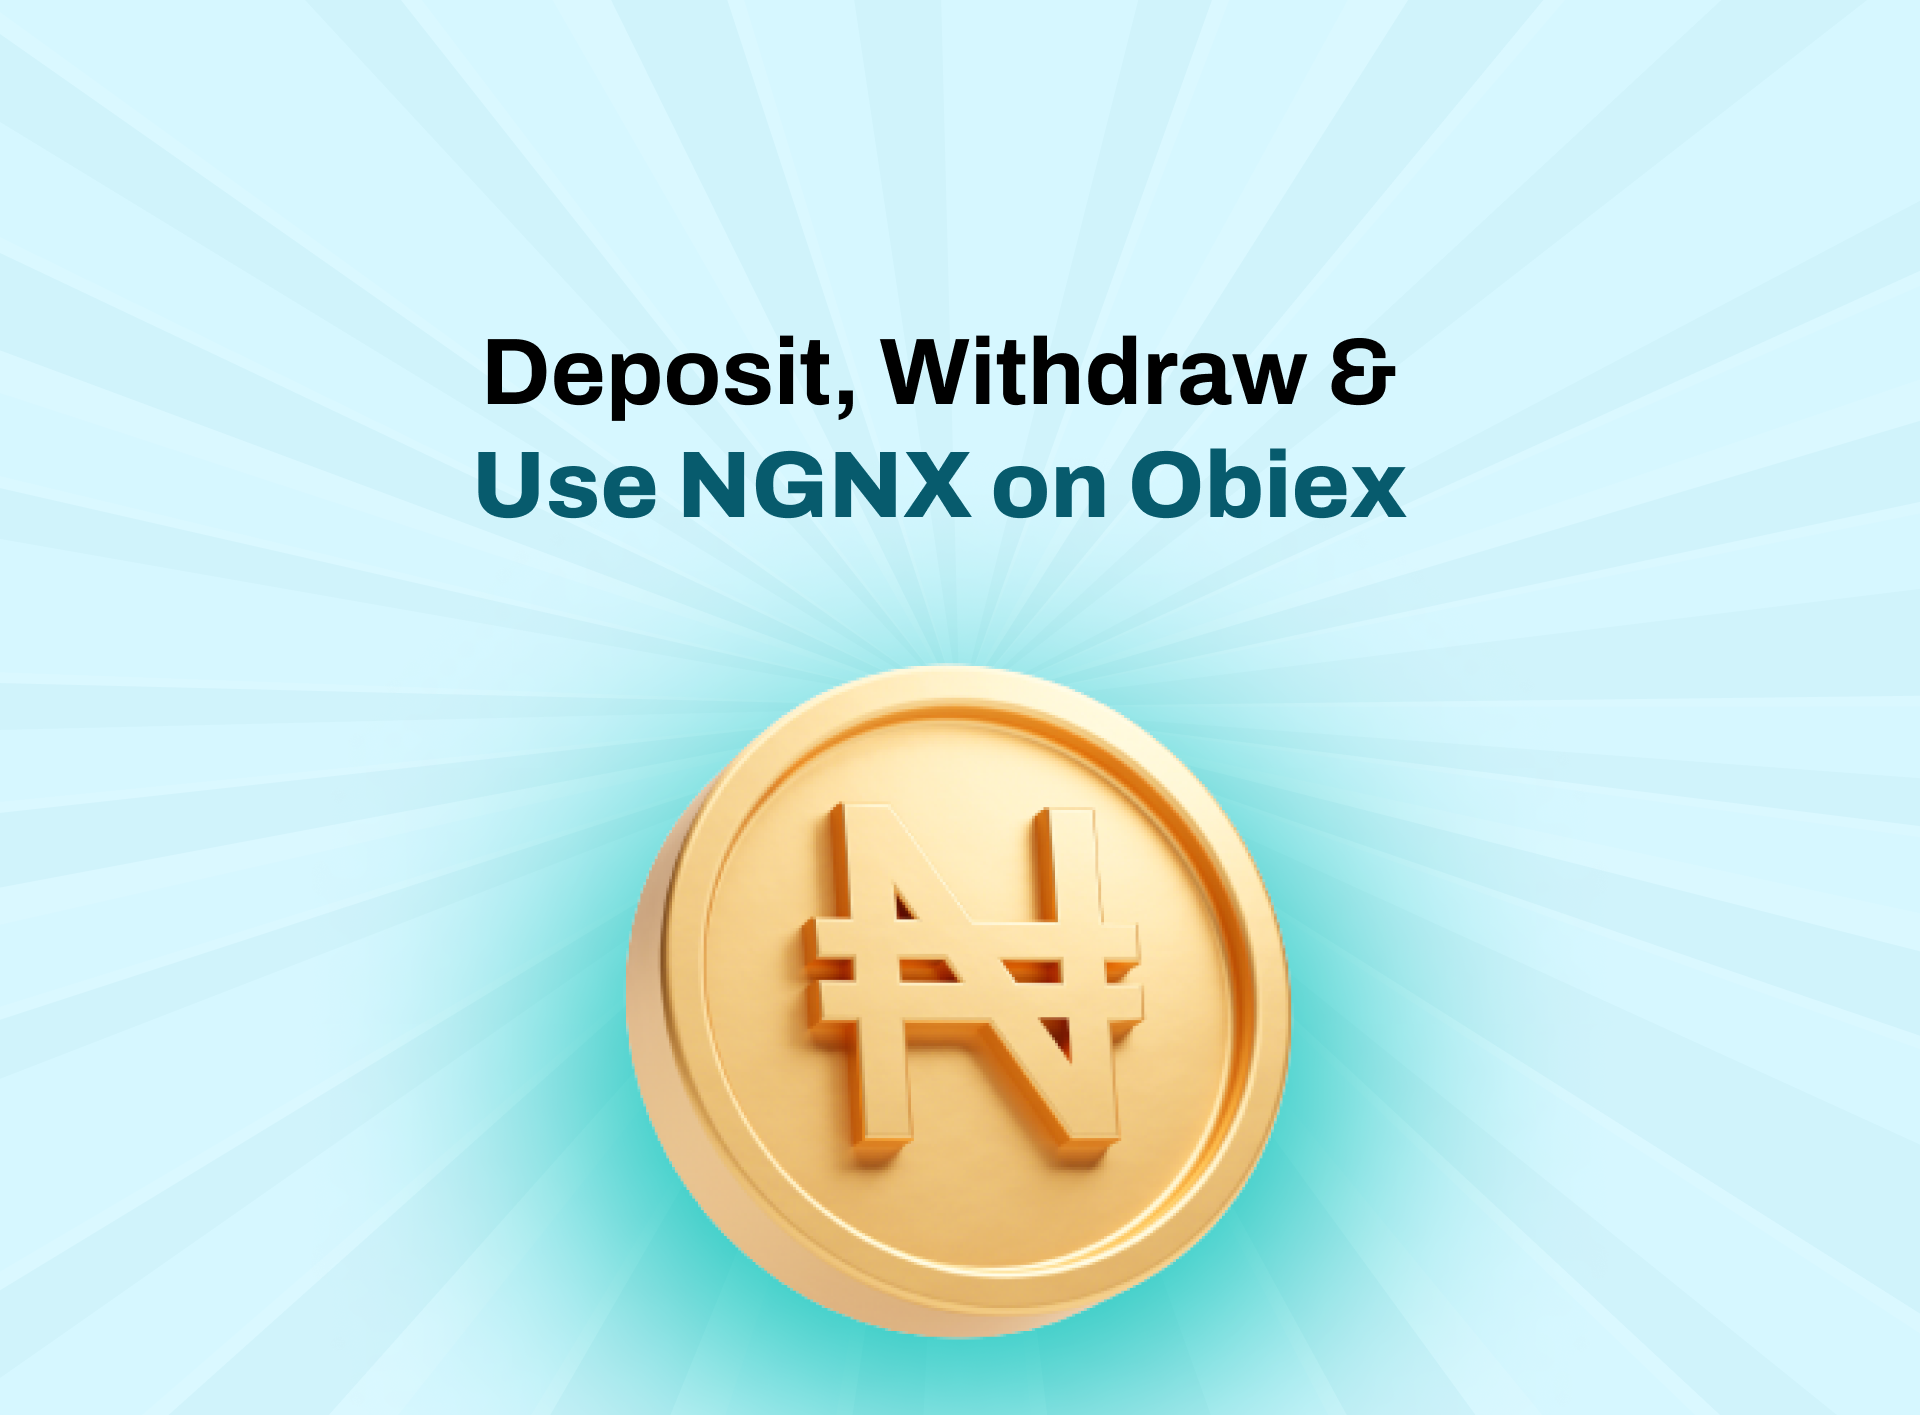 NGNX Naira Stablecoin on Obiex; How To Deposit, Withdraw and Use NGNX on Obiex